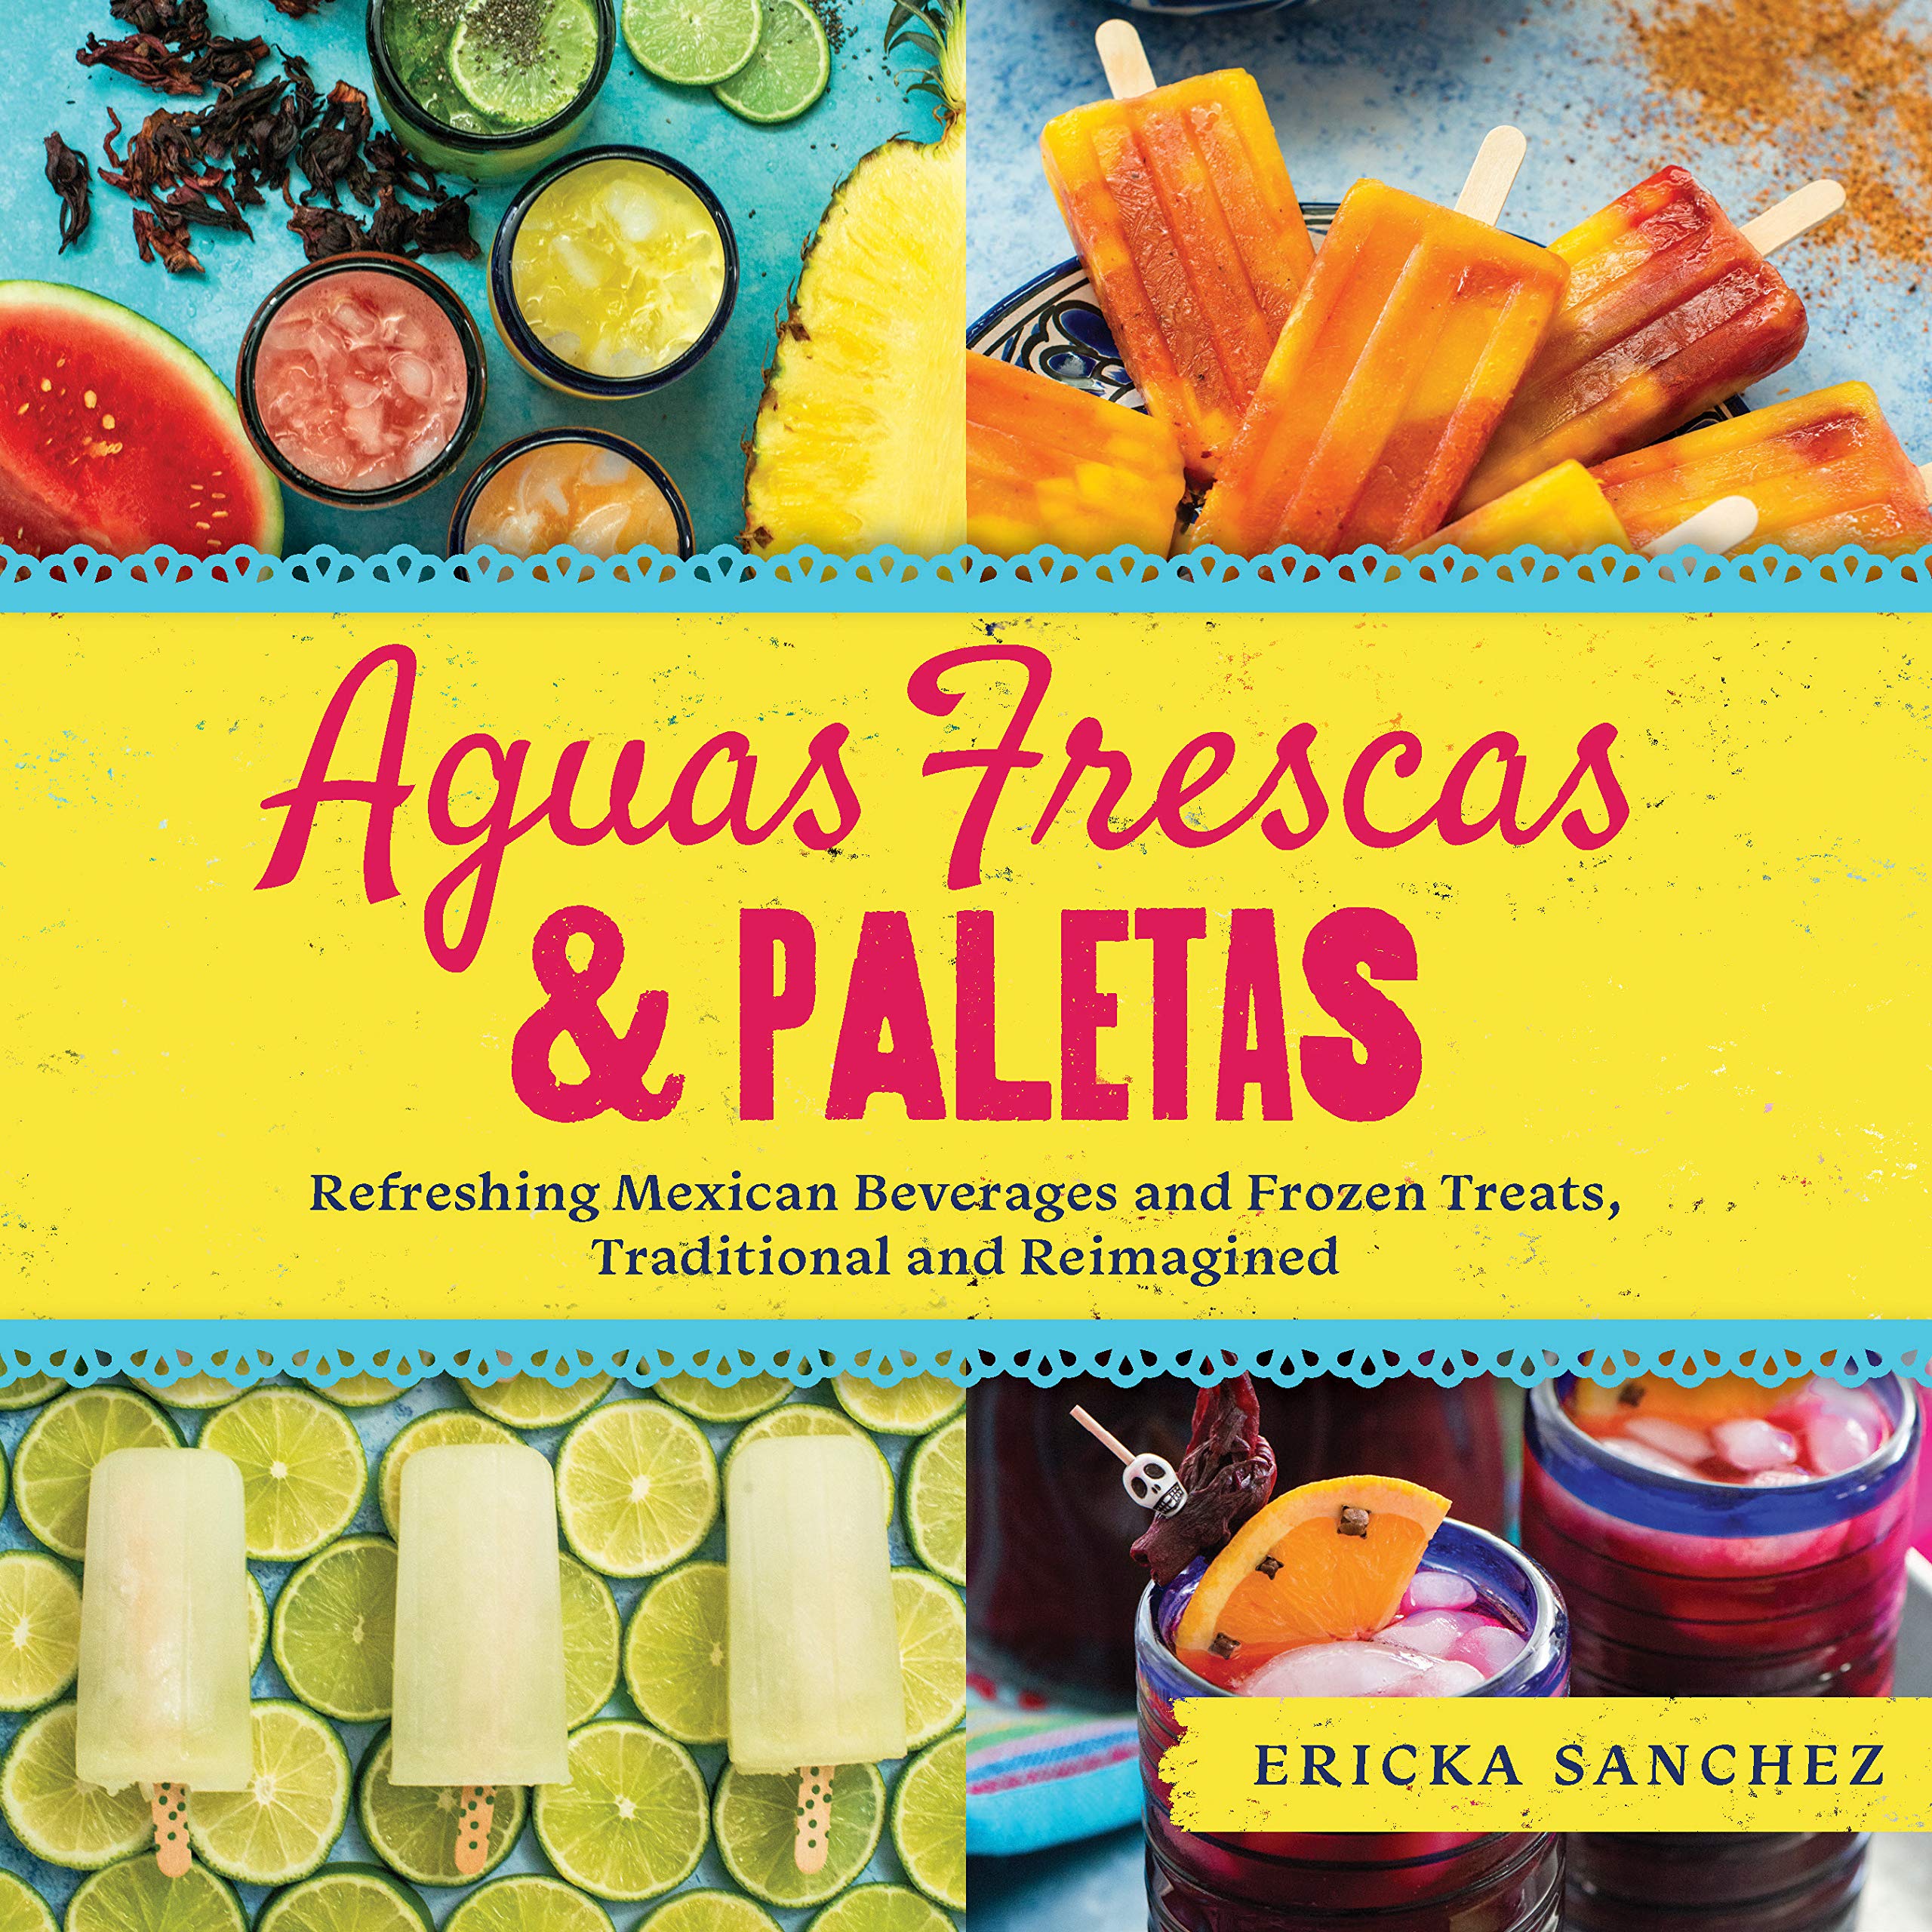 Aguas Frescas & Paletas: Refreshing Mexican Drinks and Frozen Treats, Traditional and Reimagined (Ericka Sanchez)